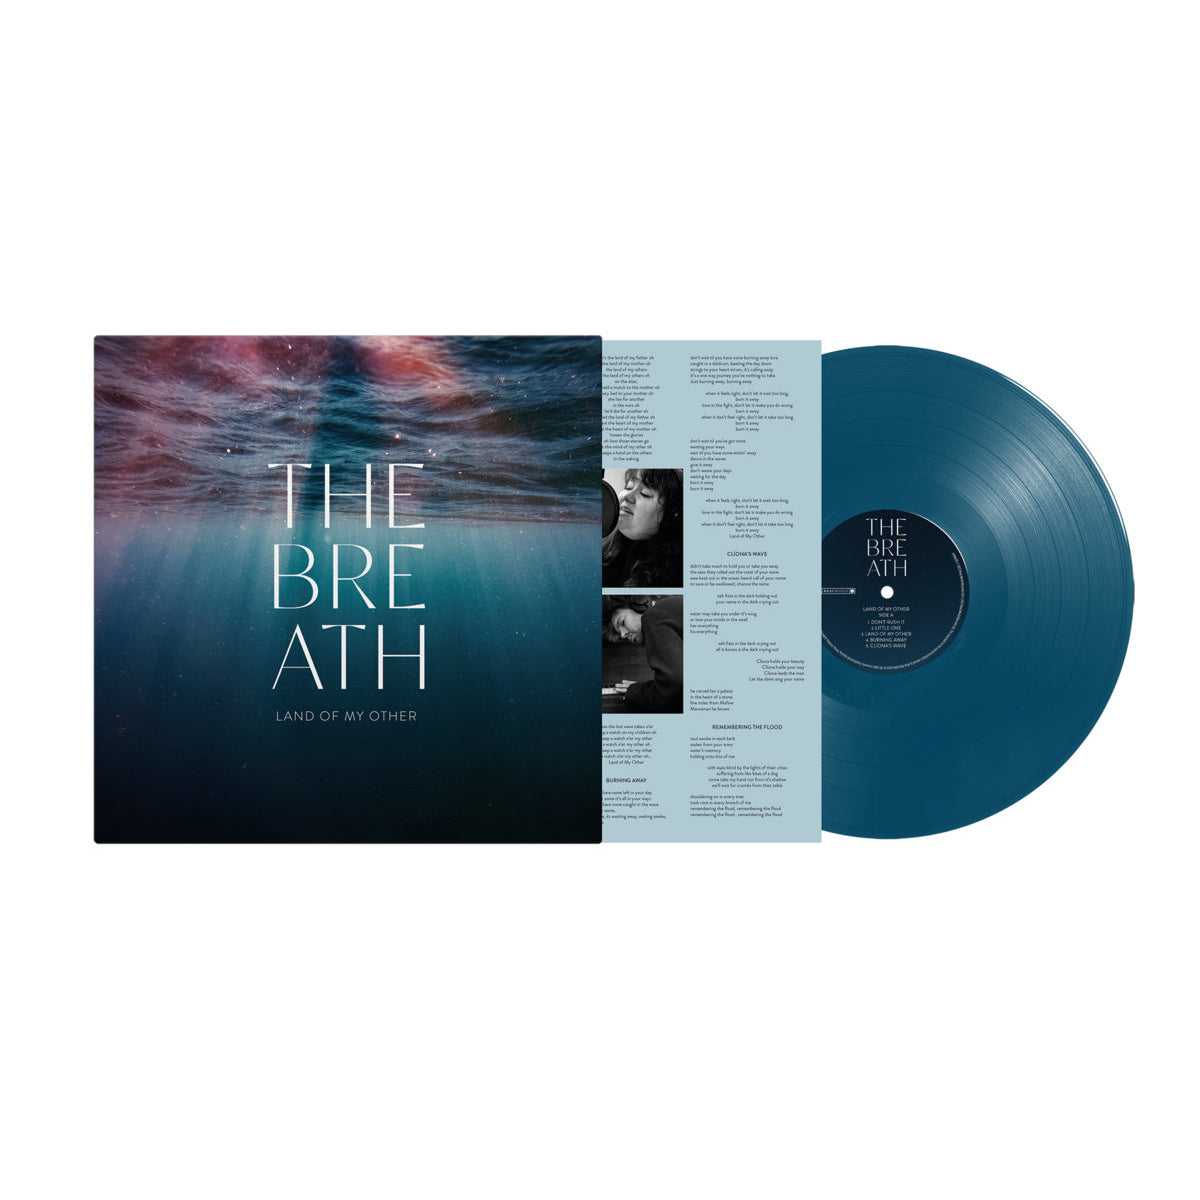 THE BREATH - Land of My Other - LP - Sea Blue Vinyl [OCT 13]